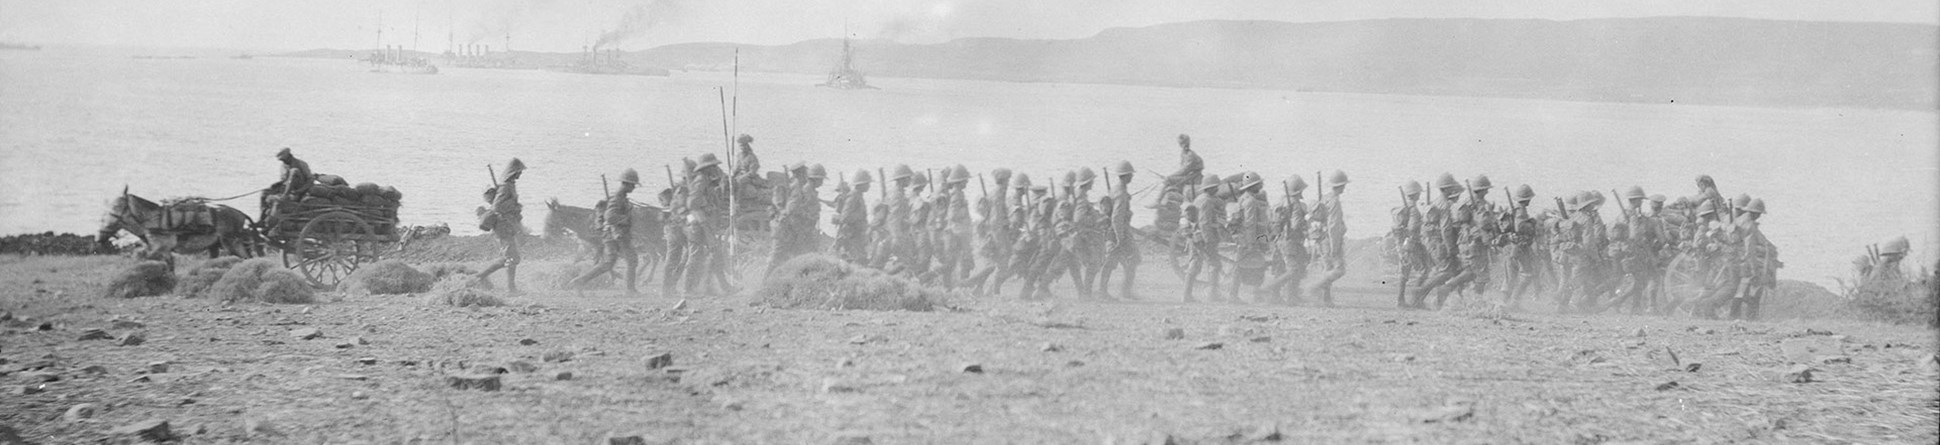 Black and white image of British troops walking on on a beach in Gallipoli, Turkey